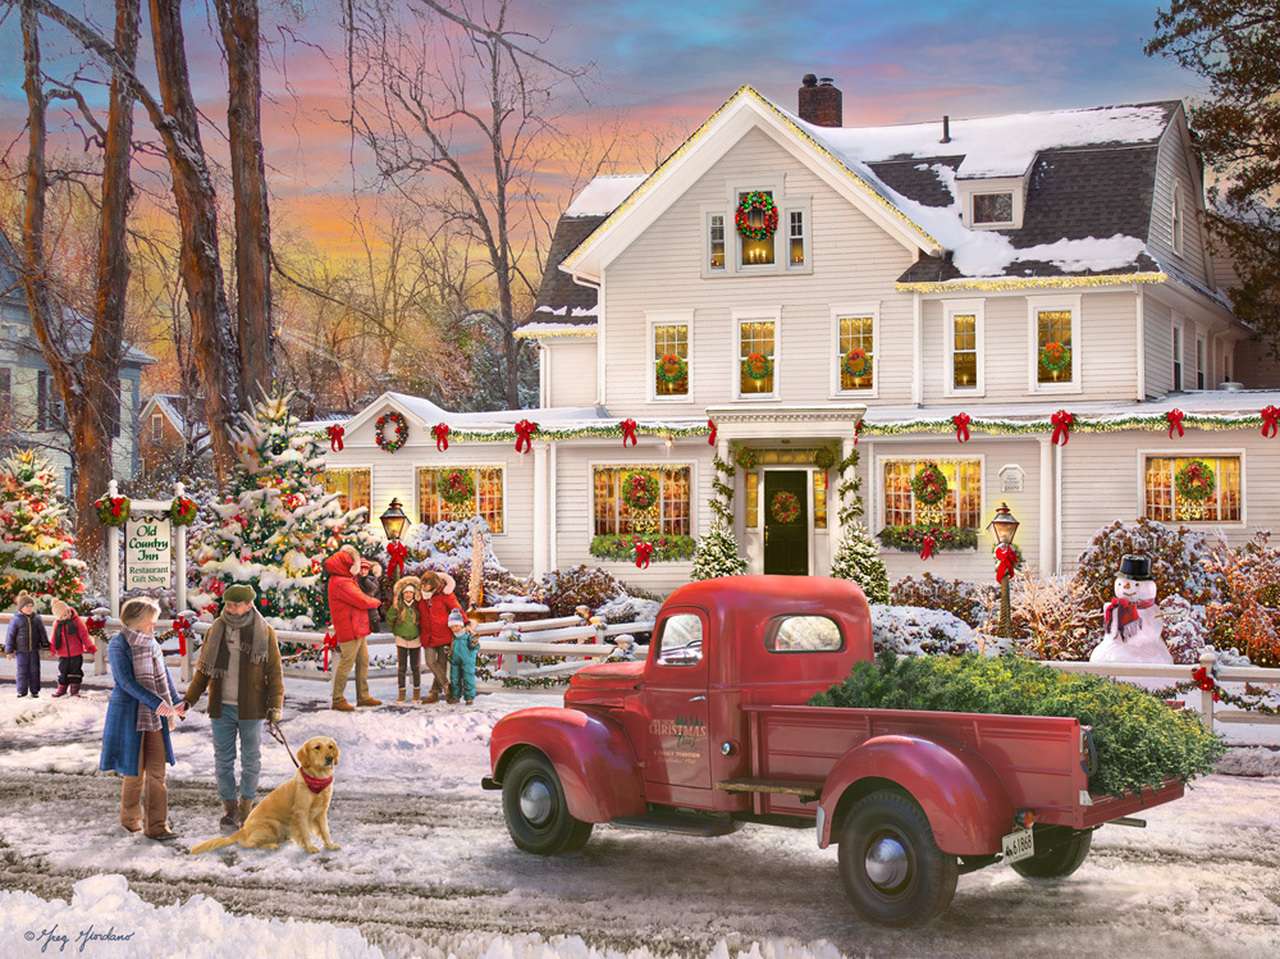 The Inn at Christmas online puzzle